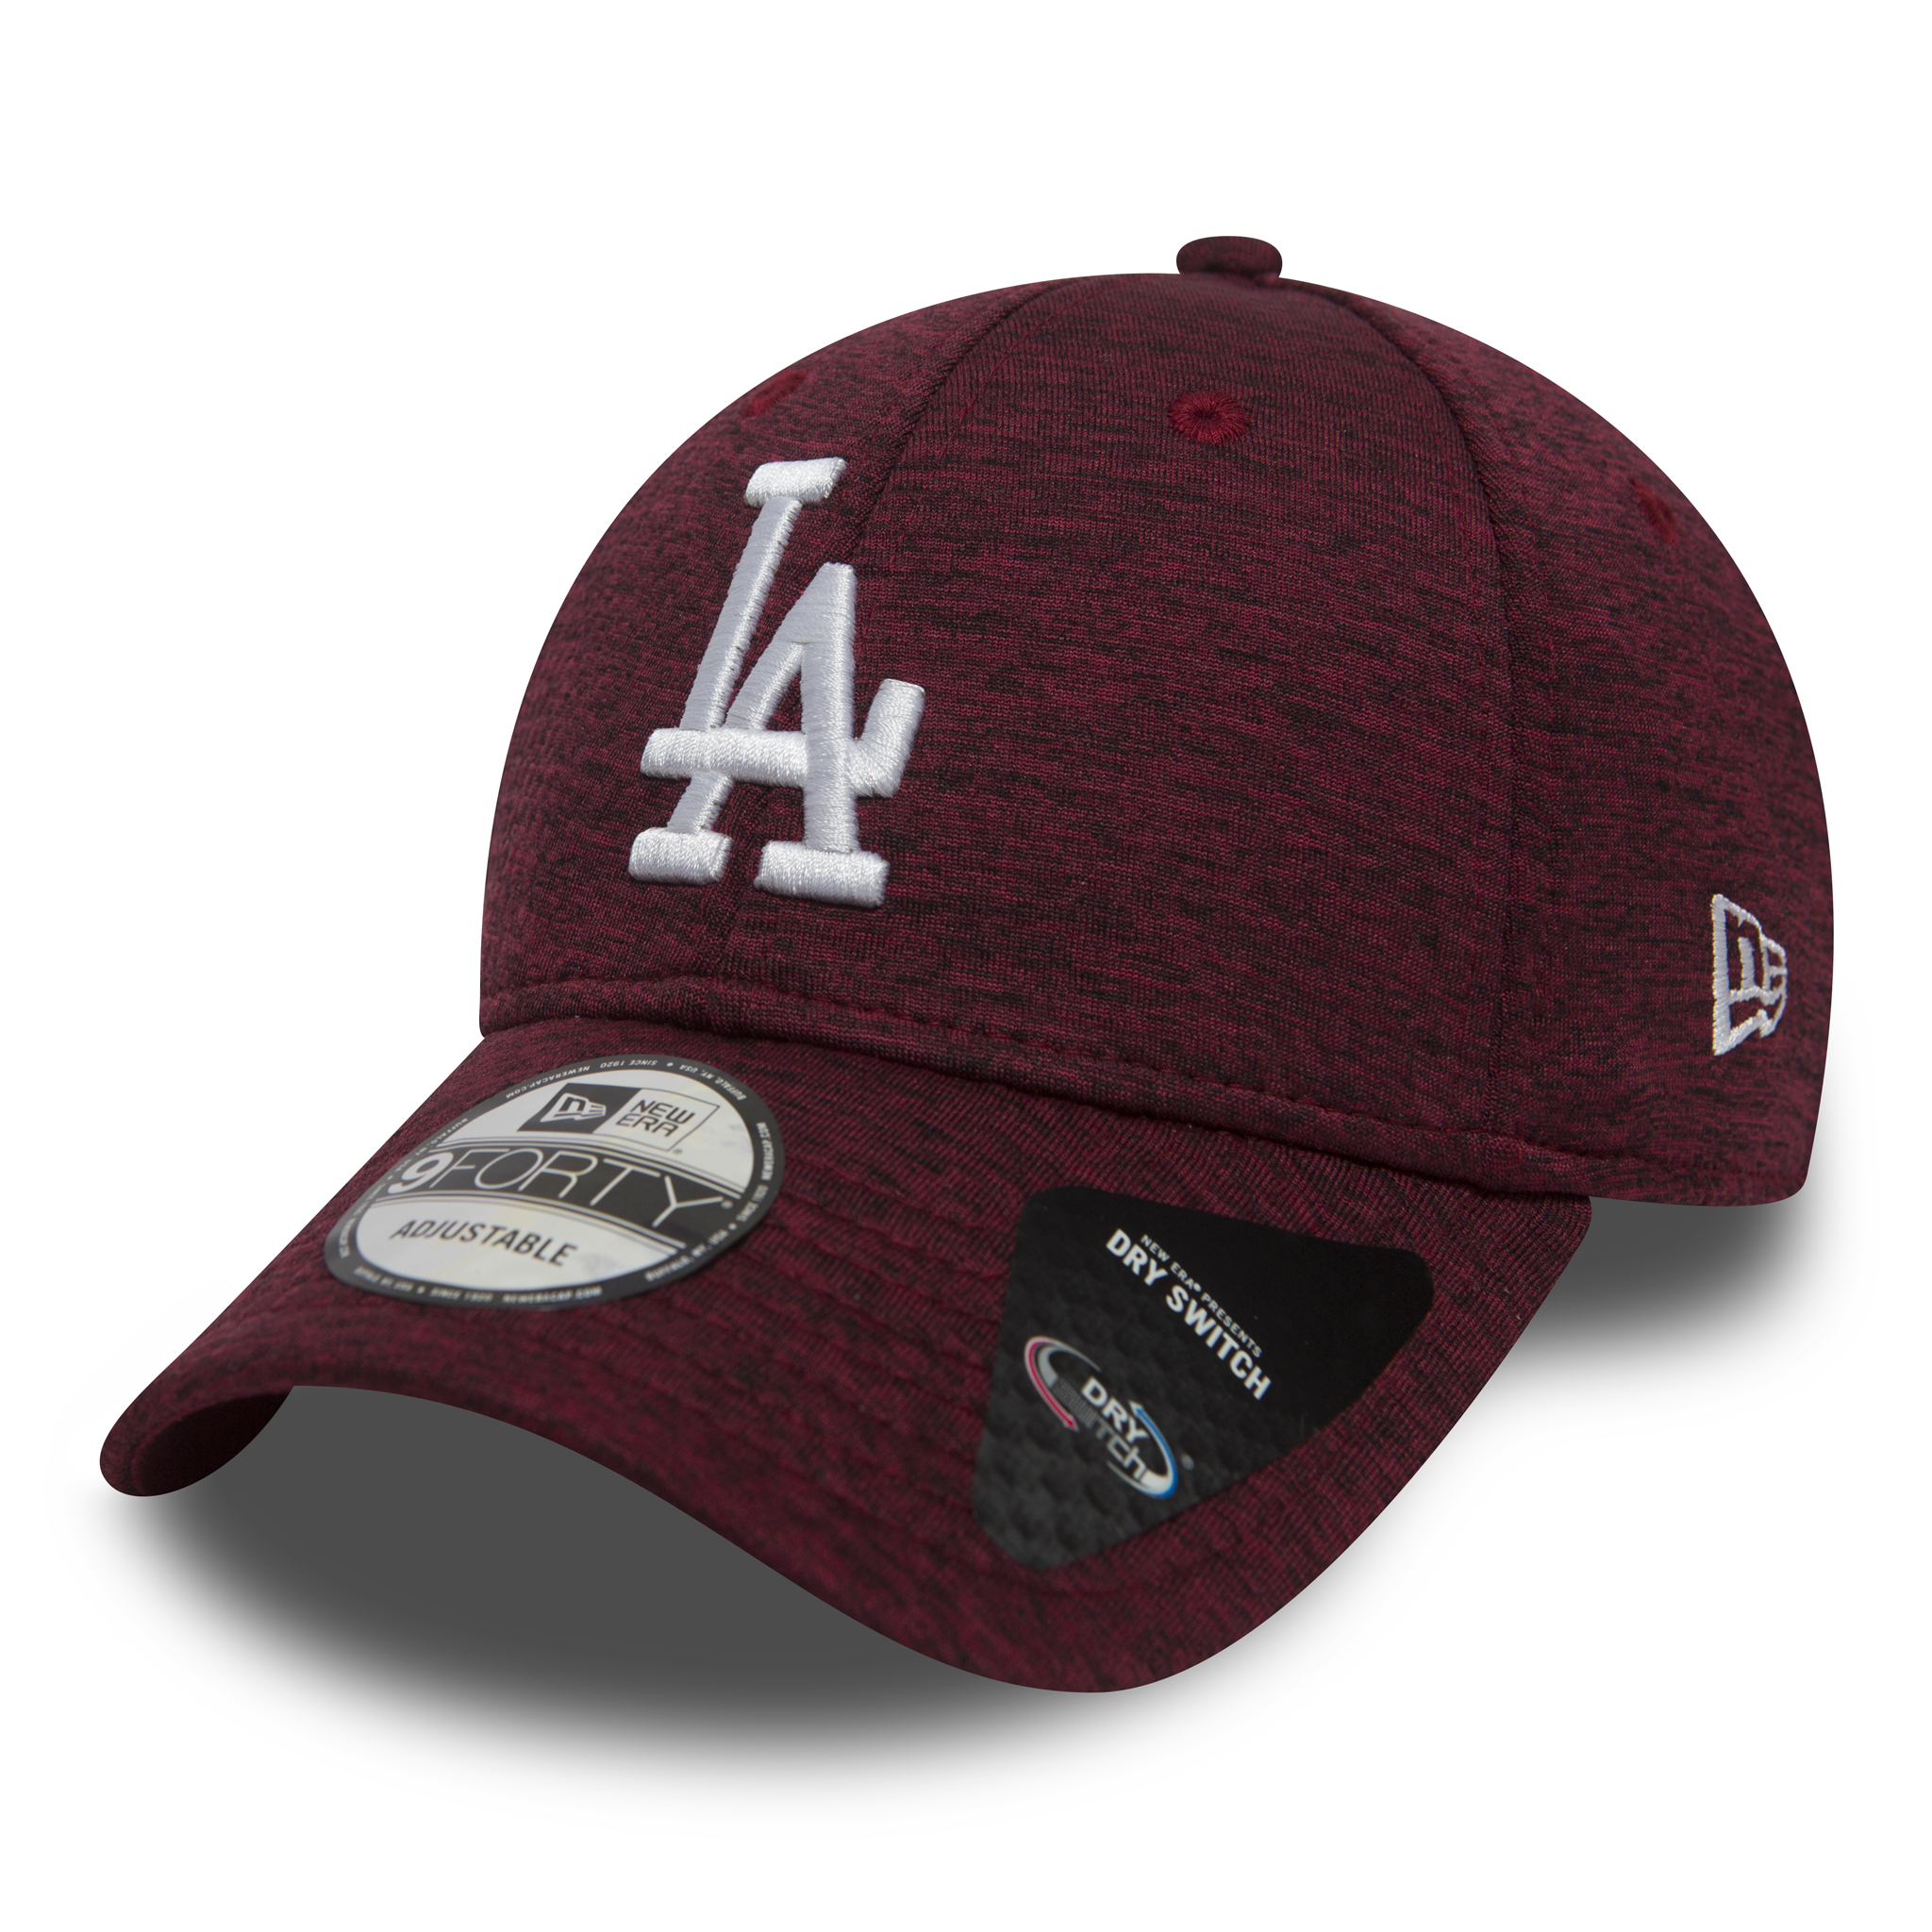 Los Angeles Dodgers 9FORTY-Kappe in Kardinalrot